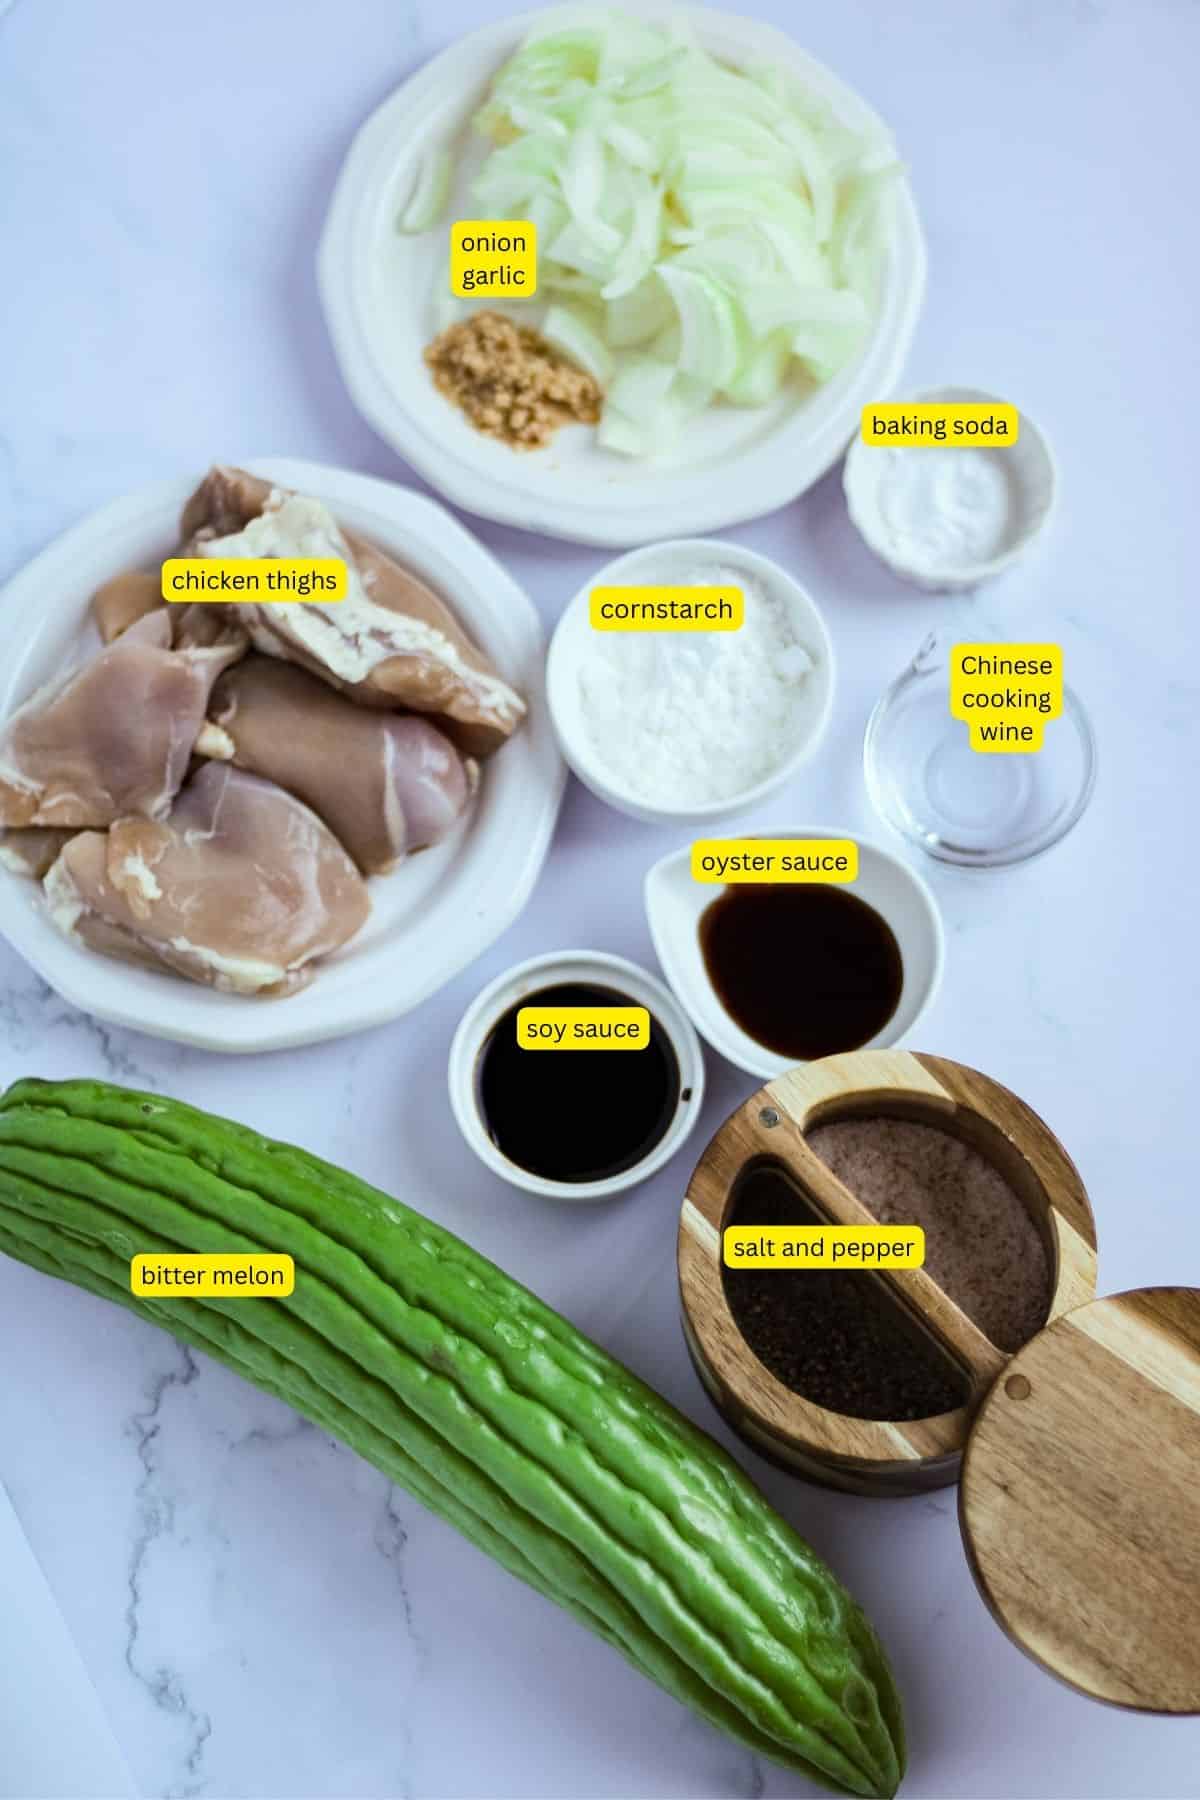 Ingredients for bitter melon and chicken with oyster sauce.